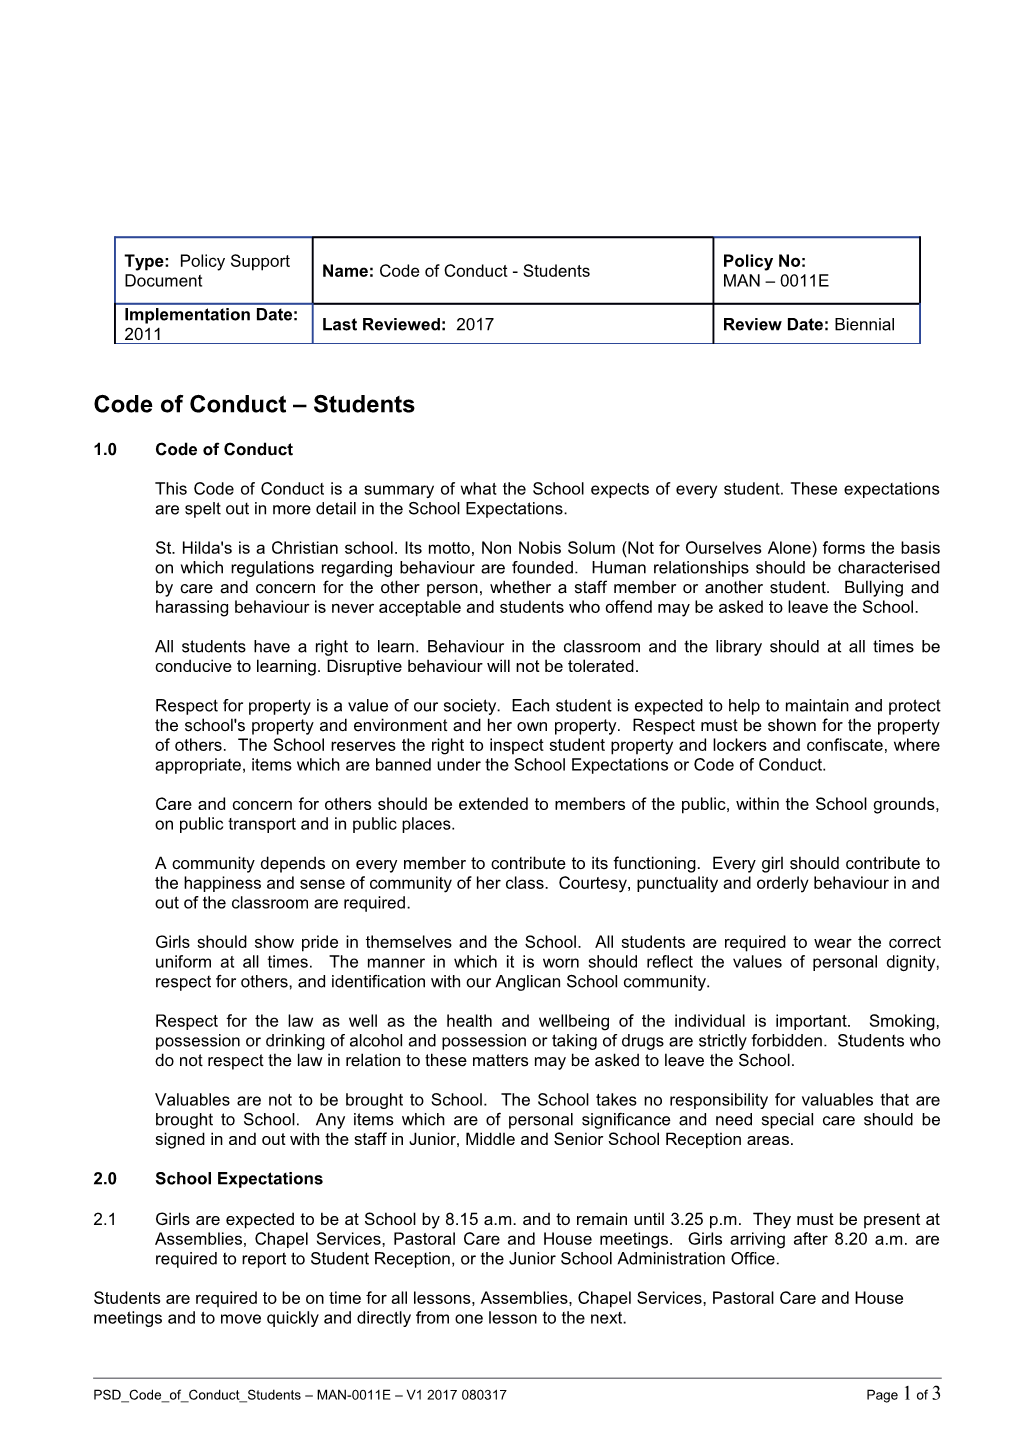 Code of Conduct Students